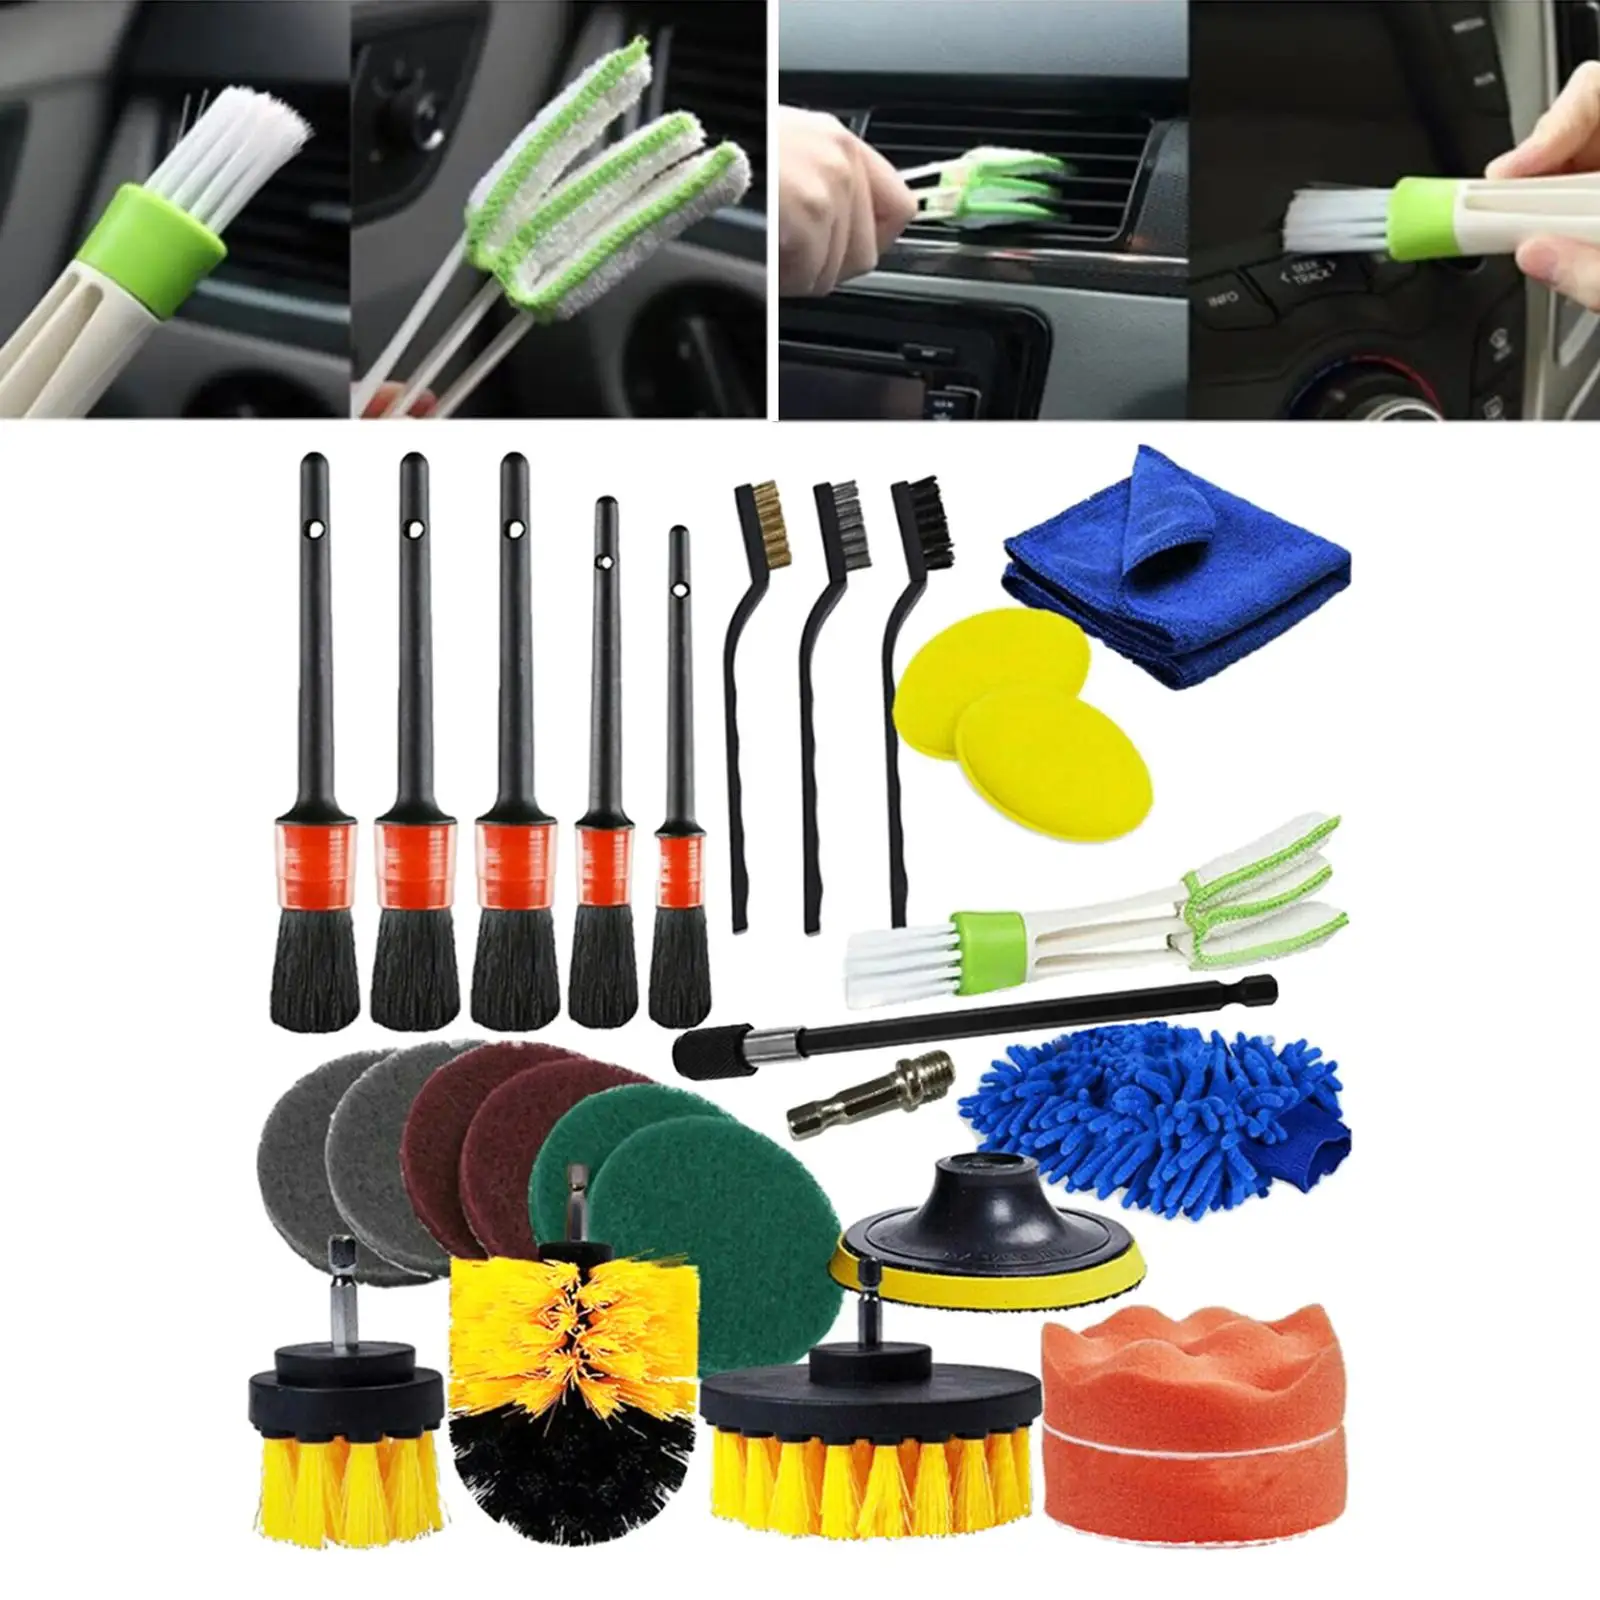 26x Auto Detailing Brushes Kit for Tire Rim Vents  Clean